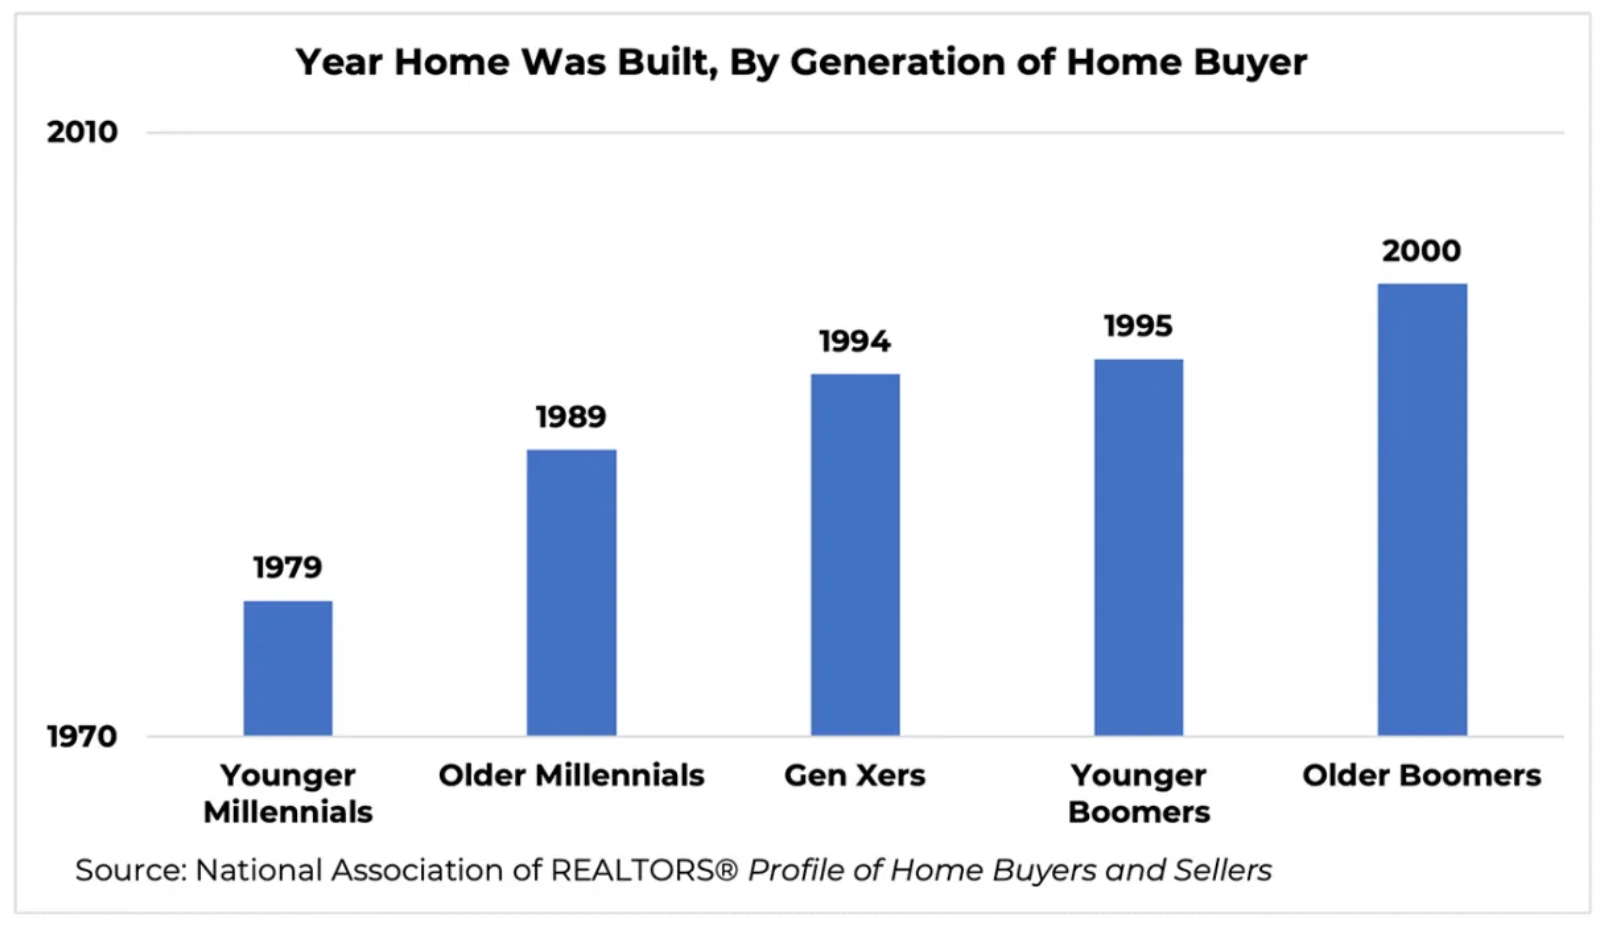 A bar chart showing the year a home was made, sorted by generation of buyers